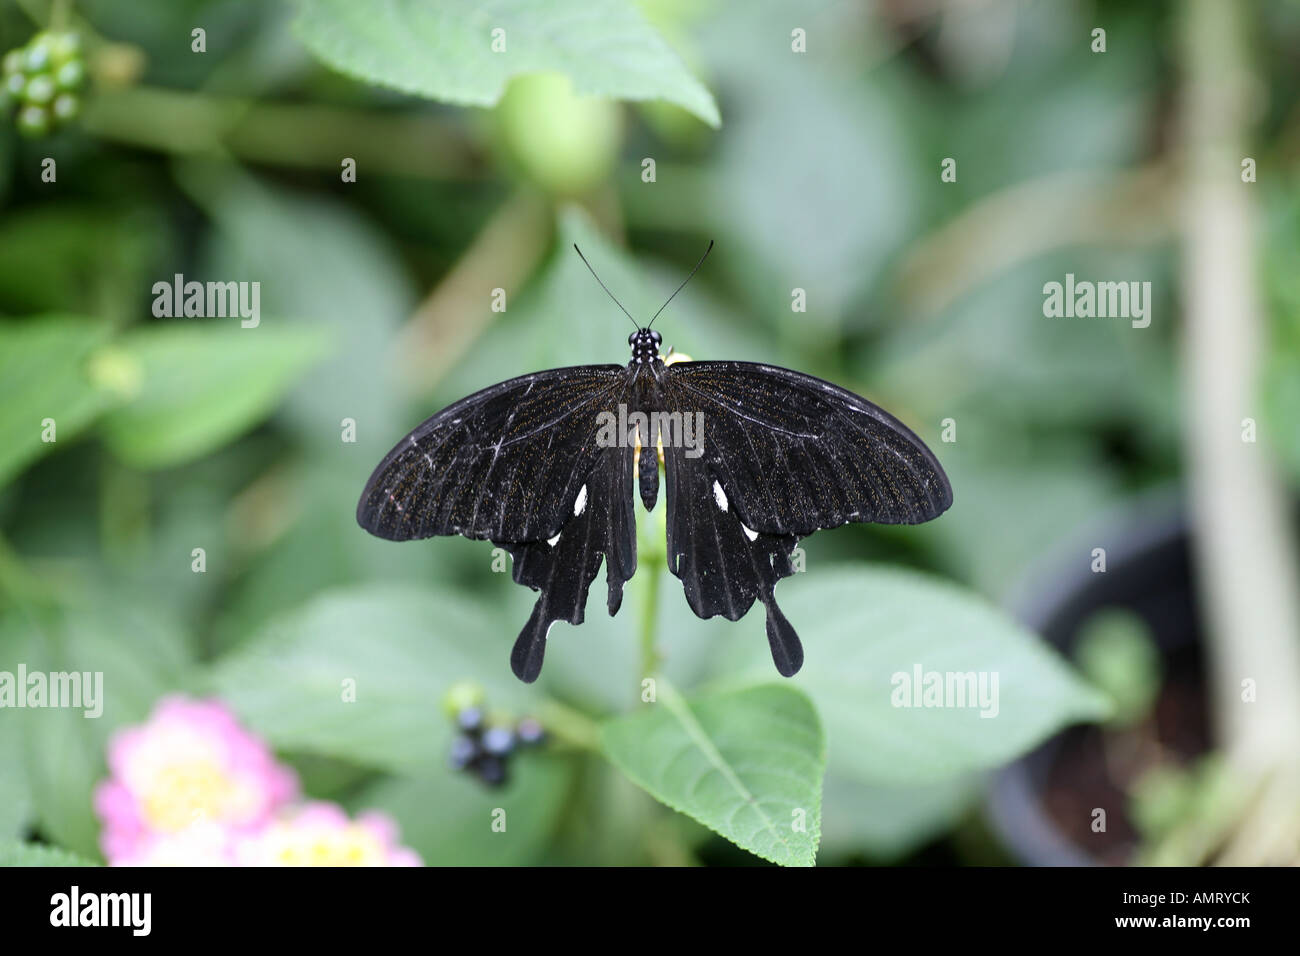 Crow Swallowtail butterfly Banque D'Images